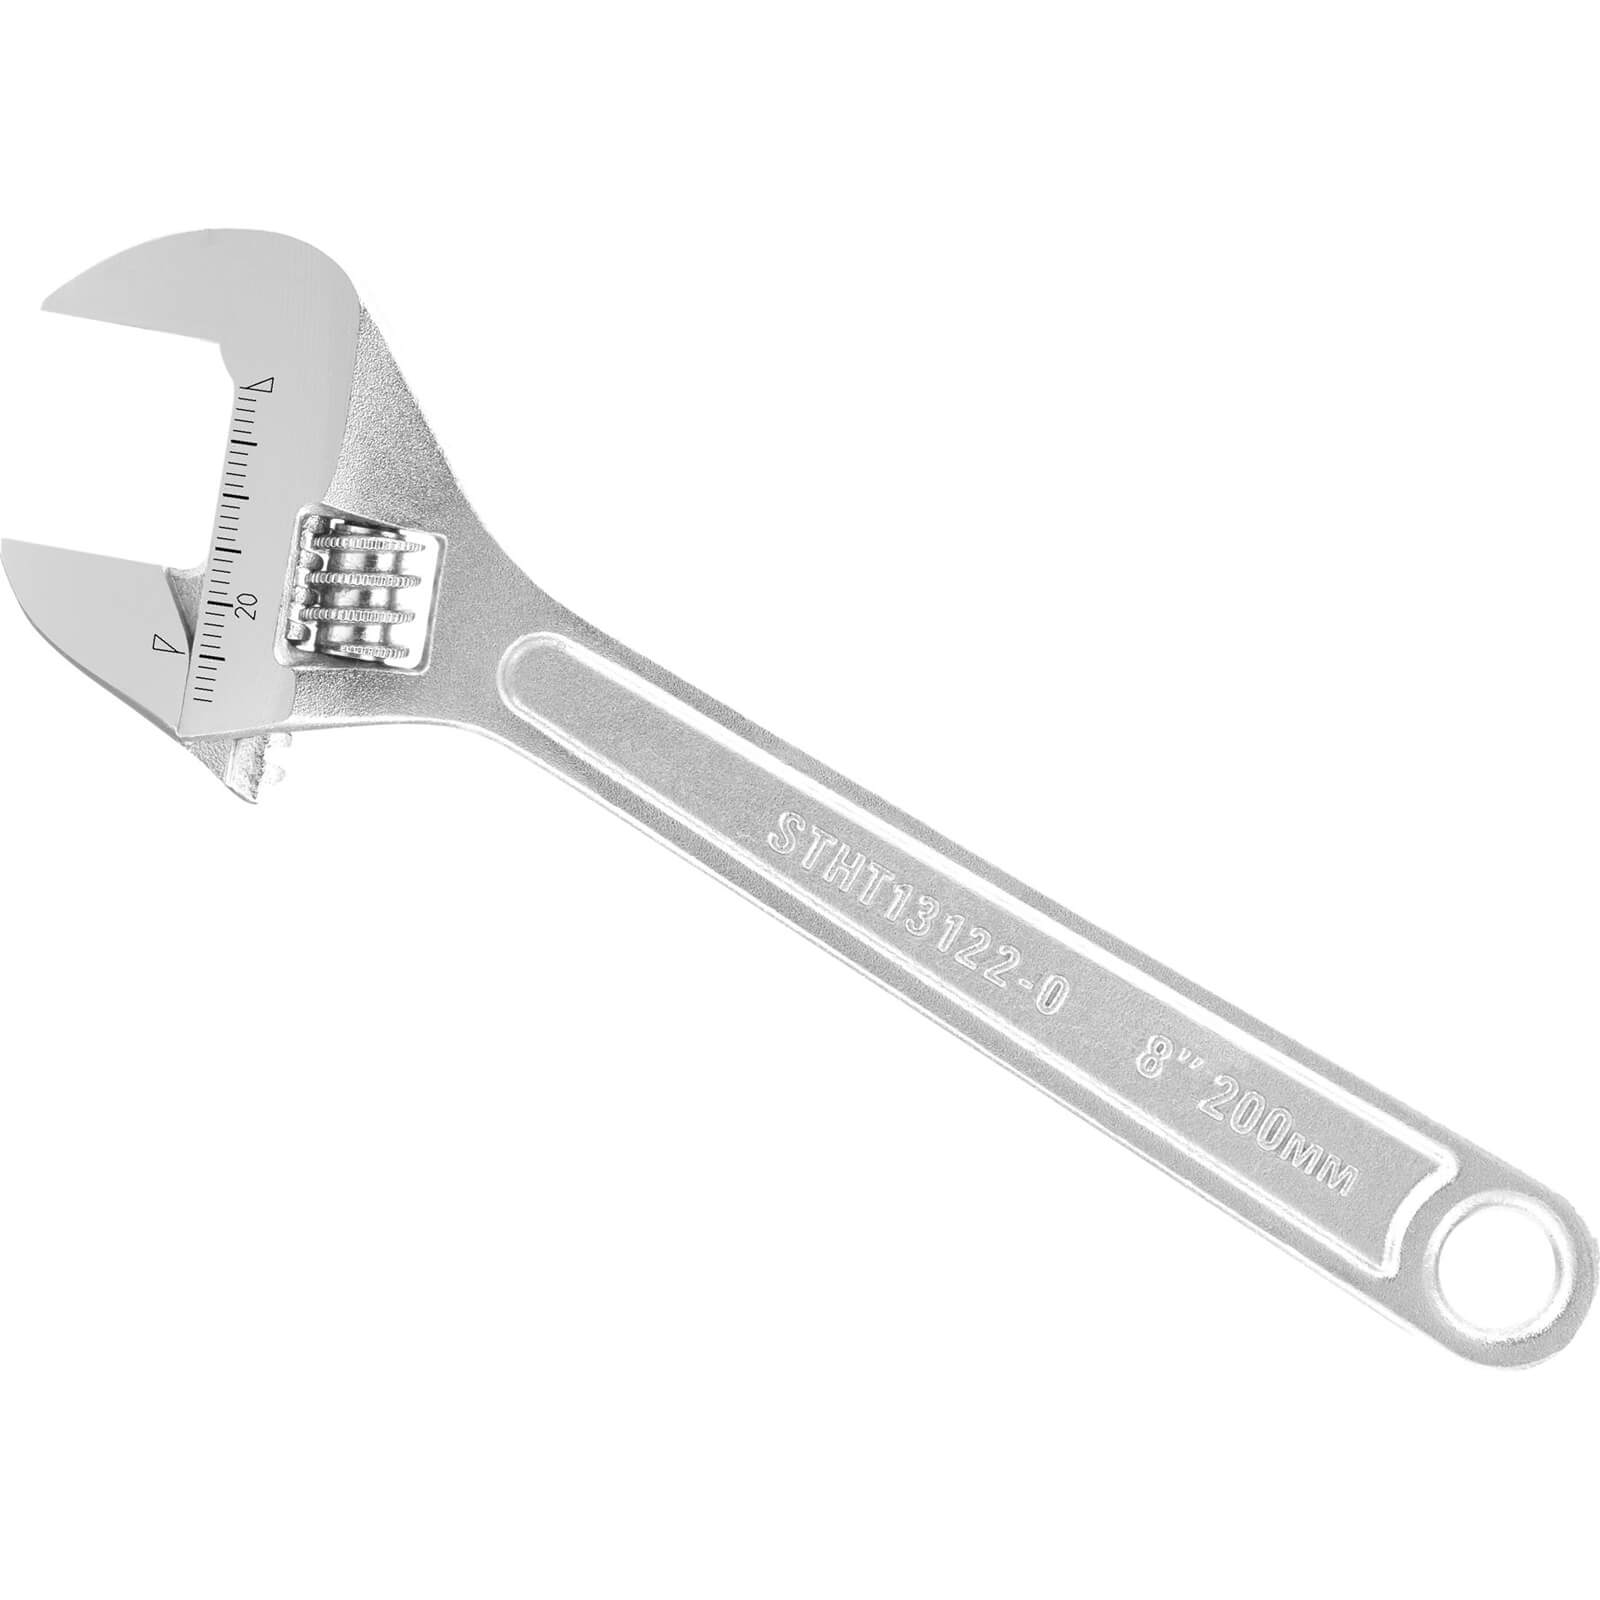 Photos - Wrench Stanley Metal Adjustable Spanner 200mm STHT13122-0 